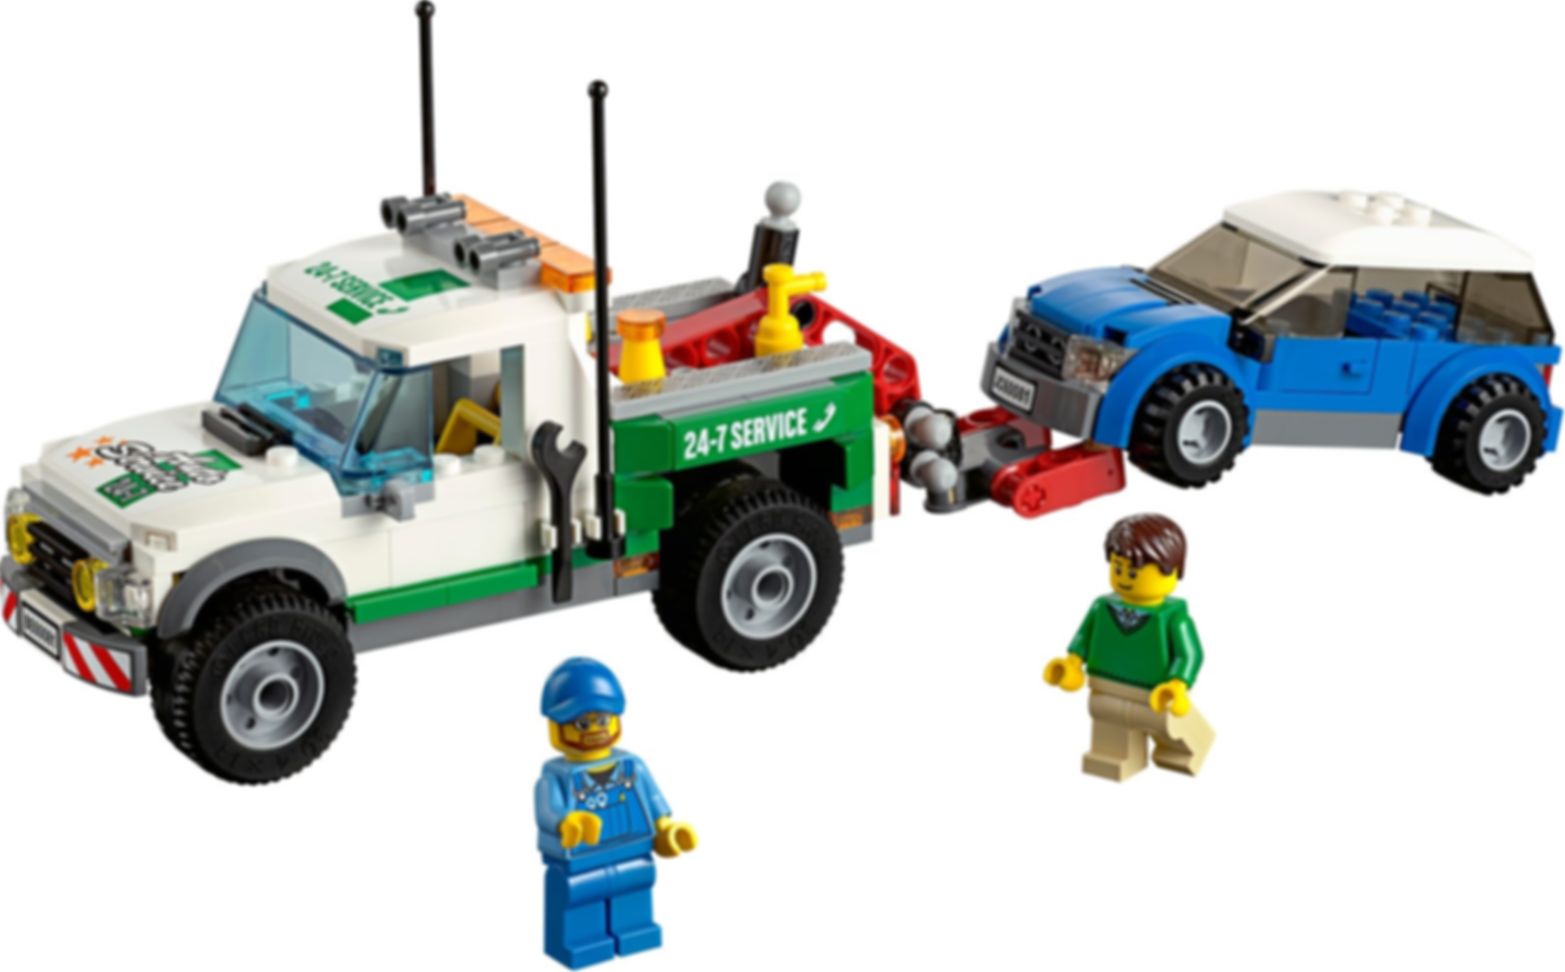 LEGO® City Pickup Tow Truck components